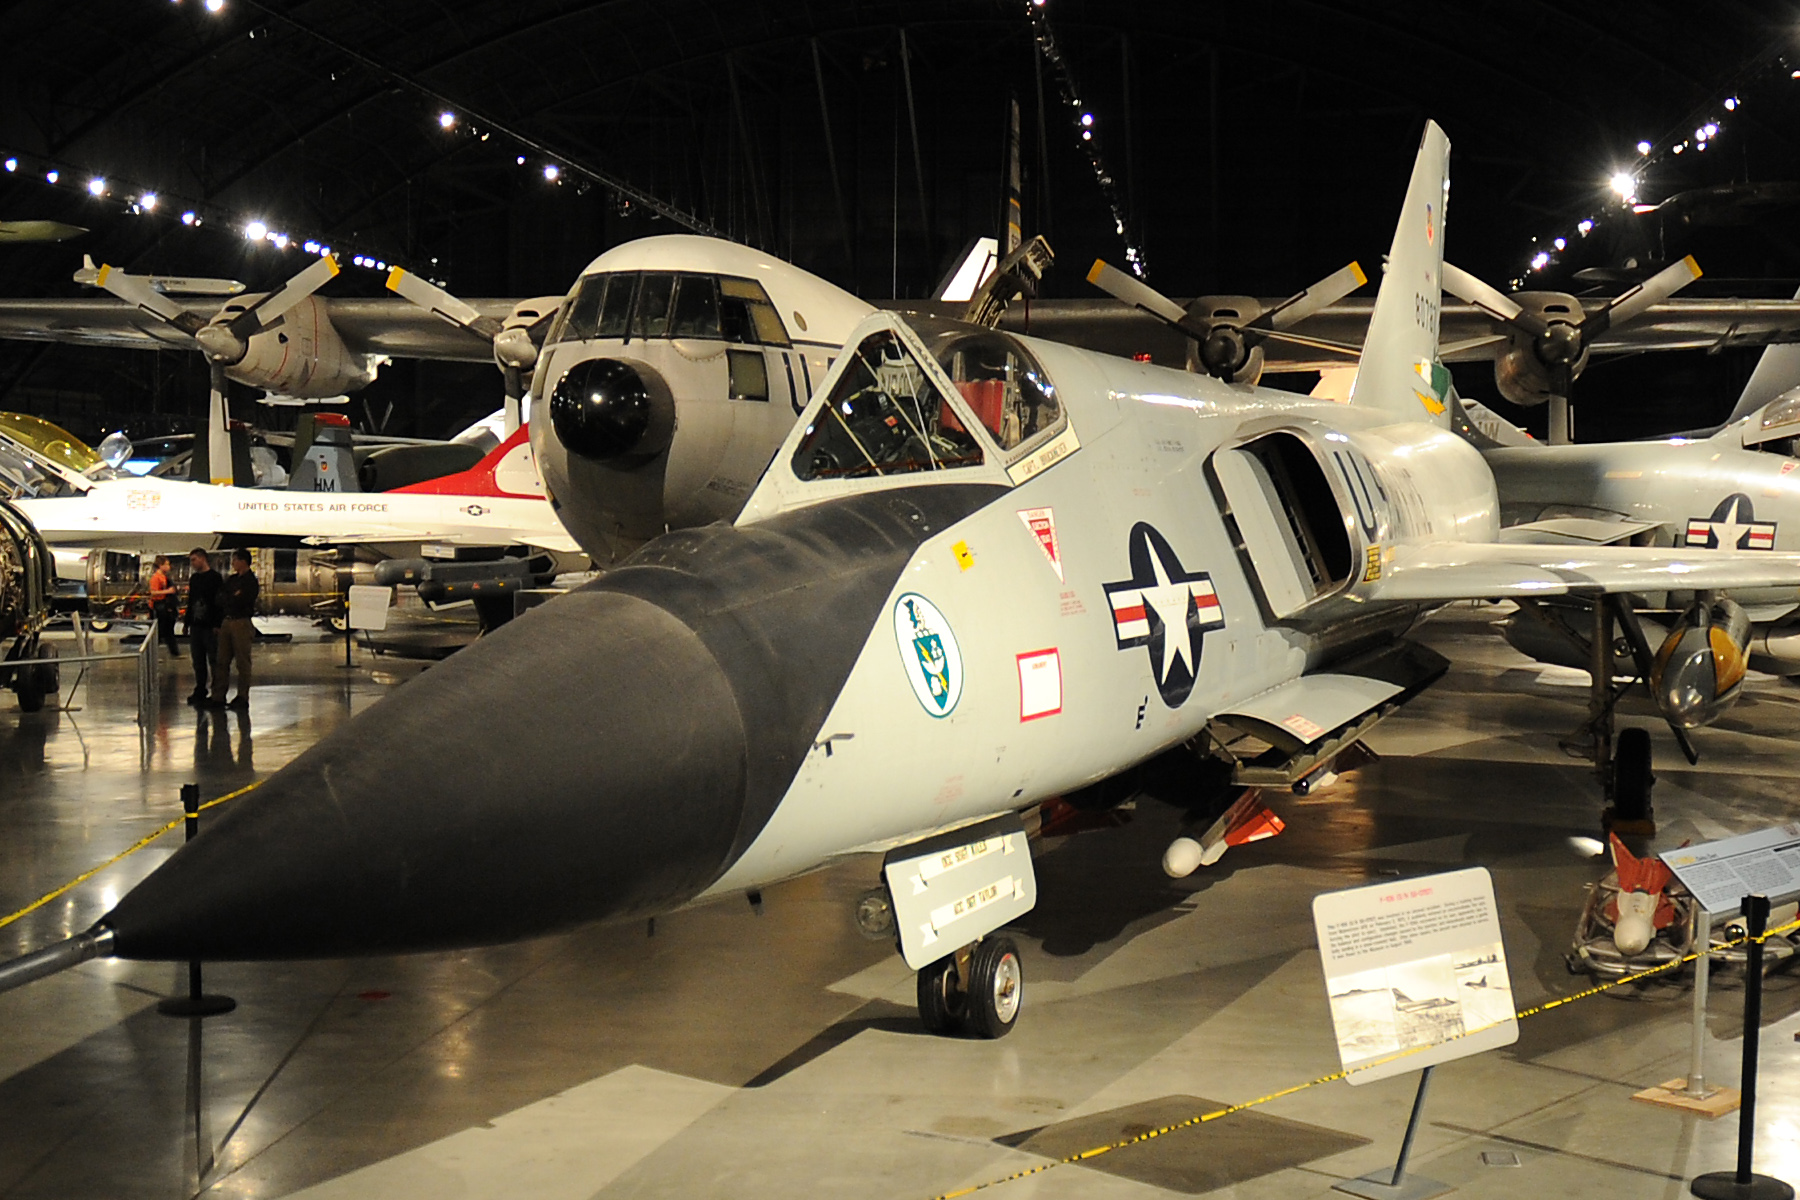 Convair F-106A-100-CO Delta Dart 58-0787 in the collection of the National Museum of the United States Air Force, Wright-Patterson AFB, Ohio. (U.S. Air Force) 